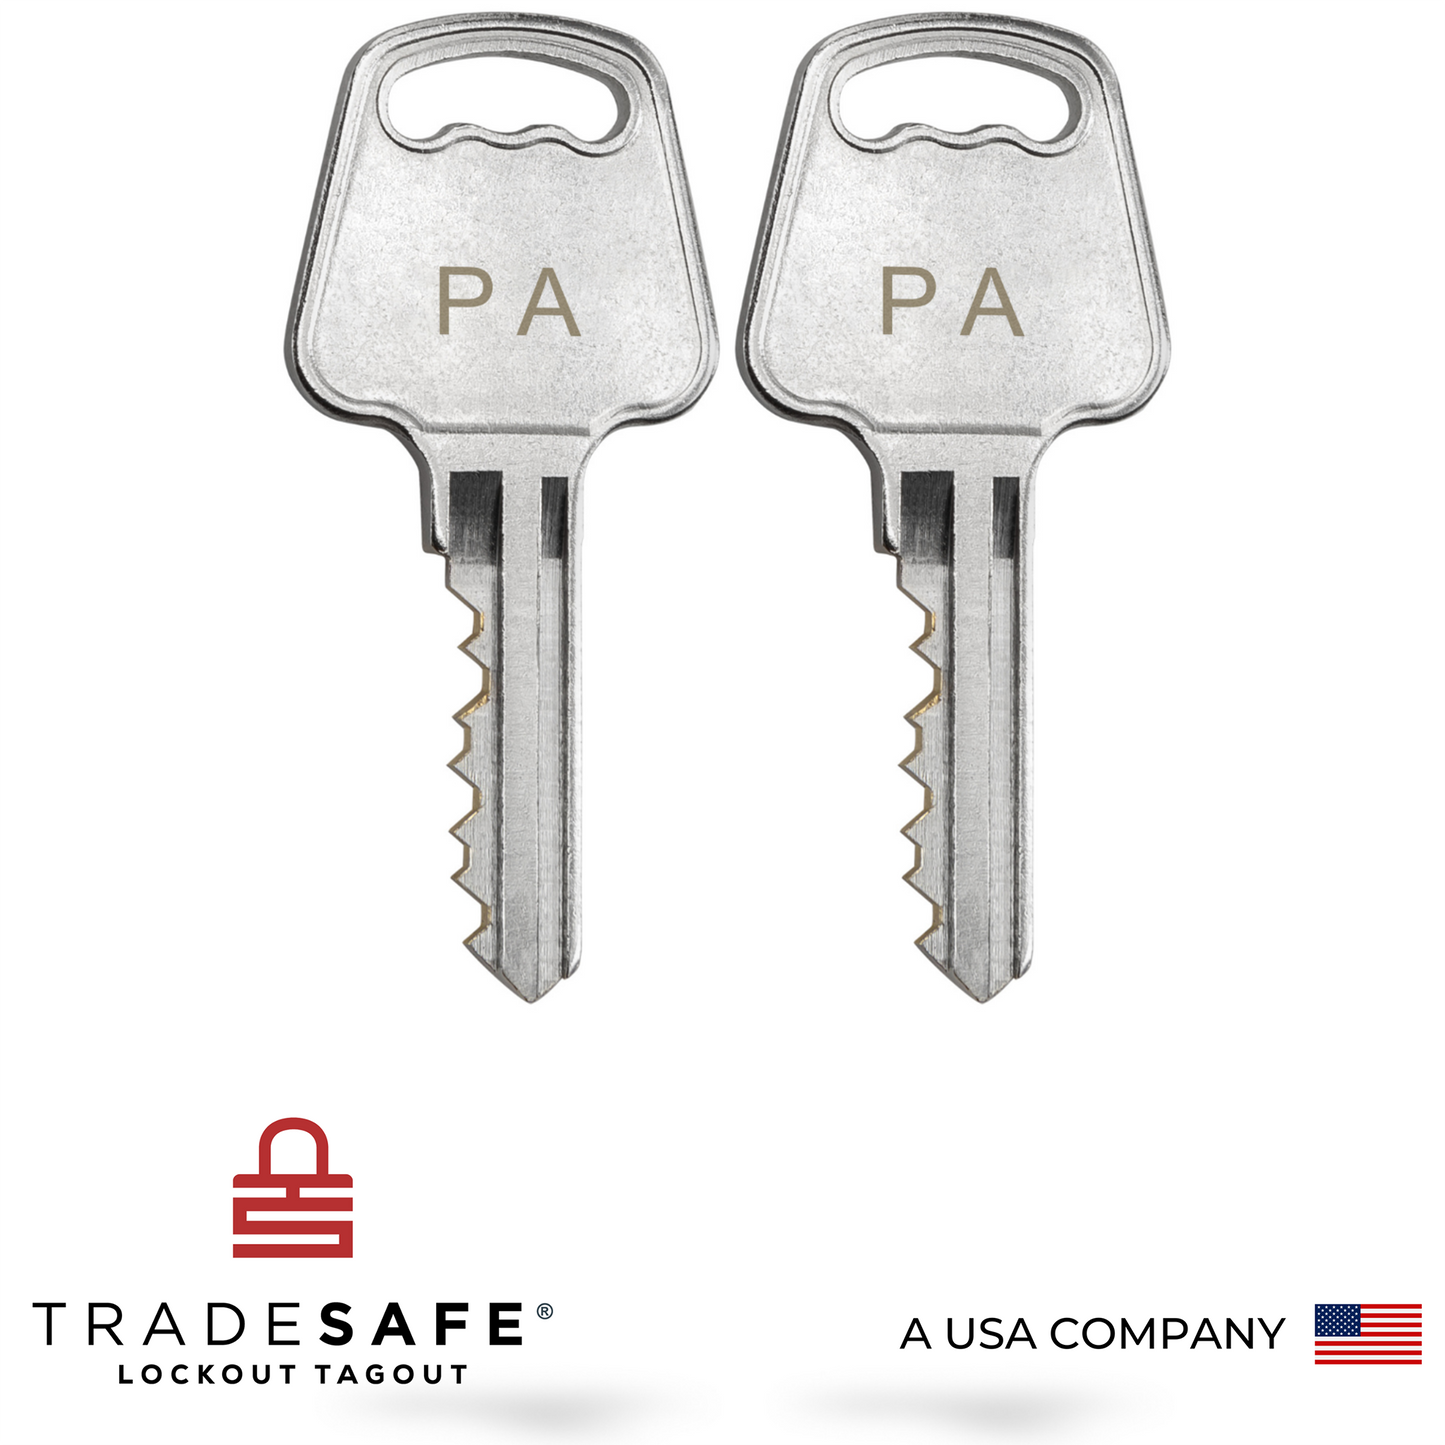 two keys, each with the letter code PA